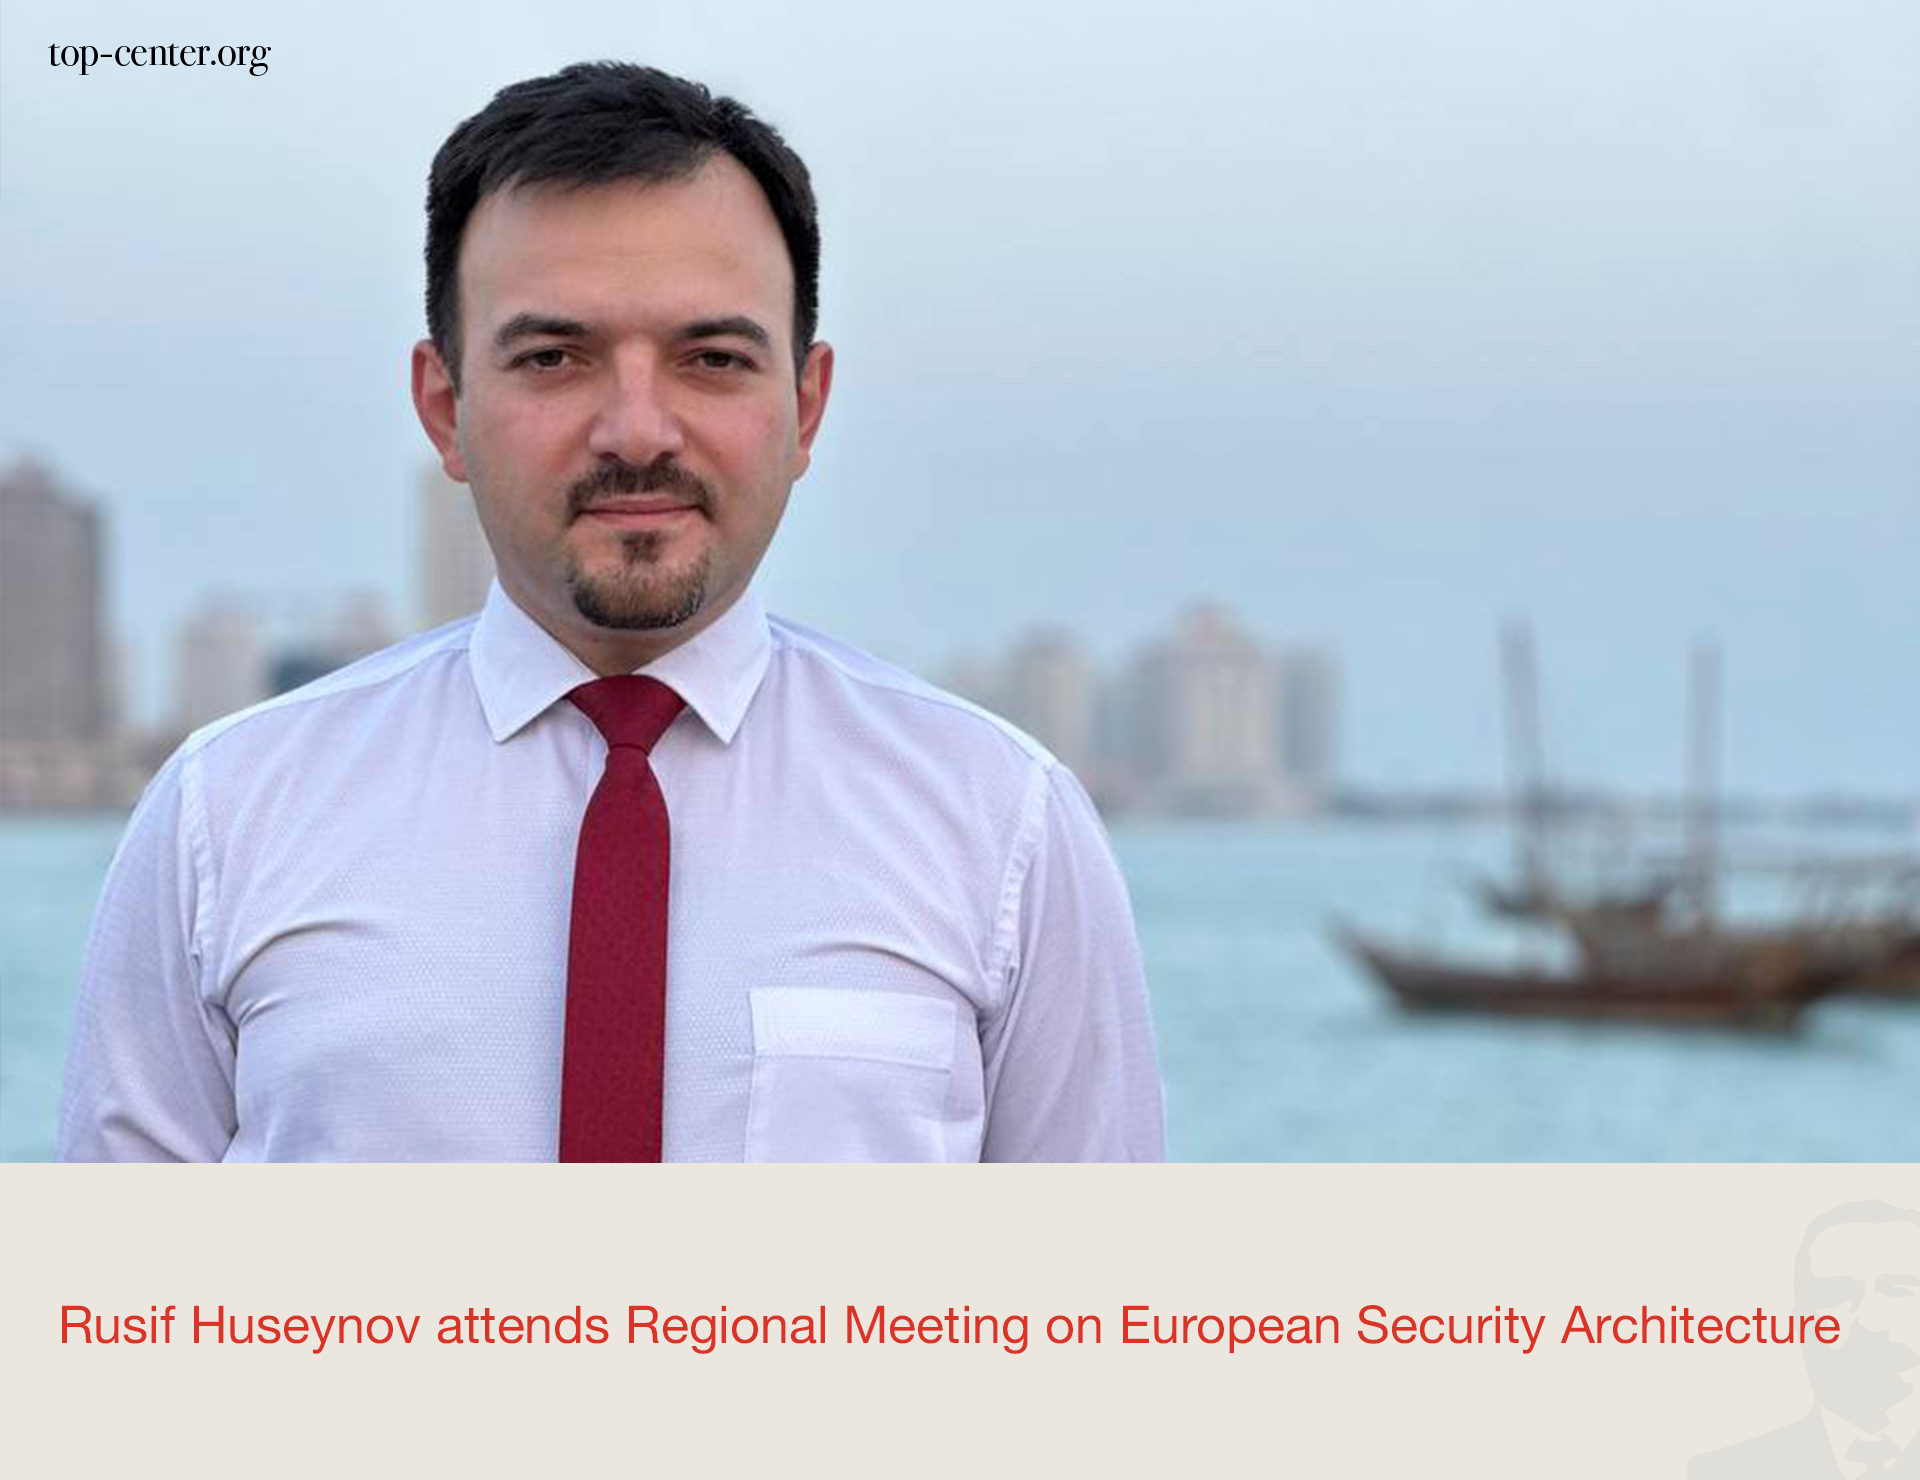 Rusif Huseynov attends Regional Meeting on European Security Architecture